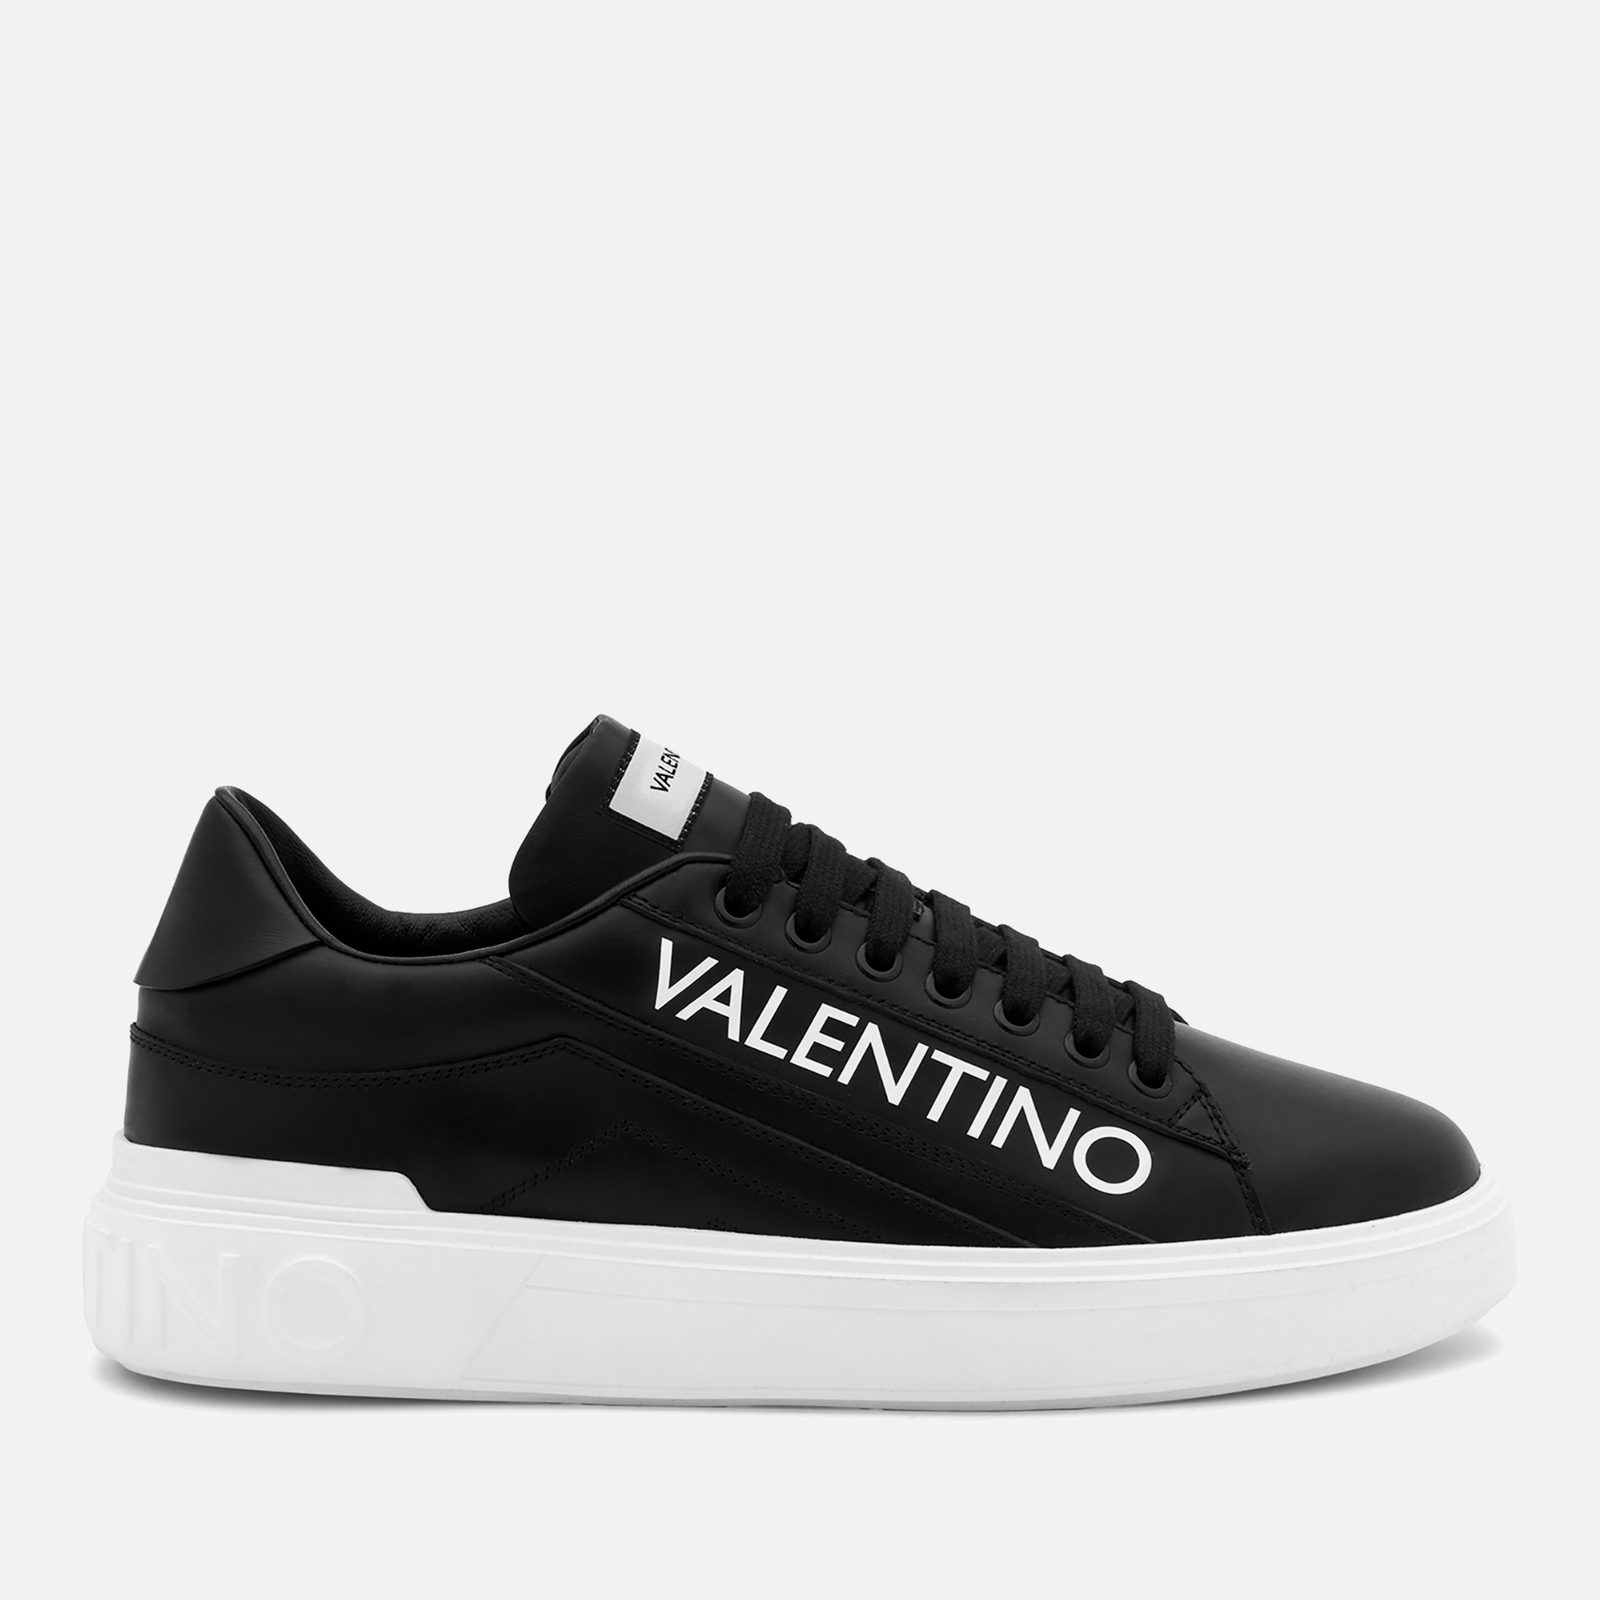 Valentino Men's Rey Leather Low Top Trainers - Black